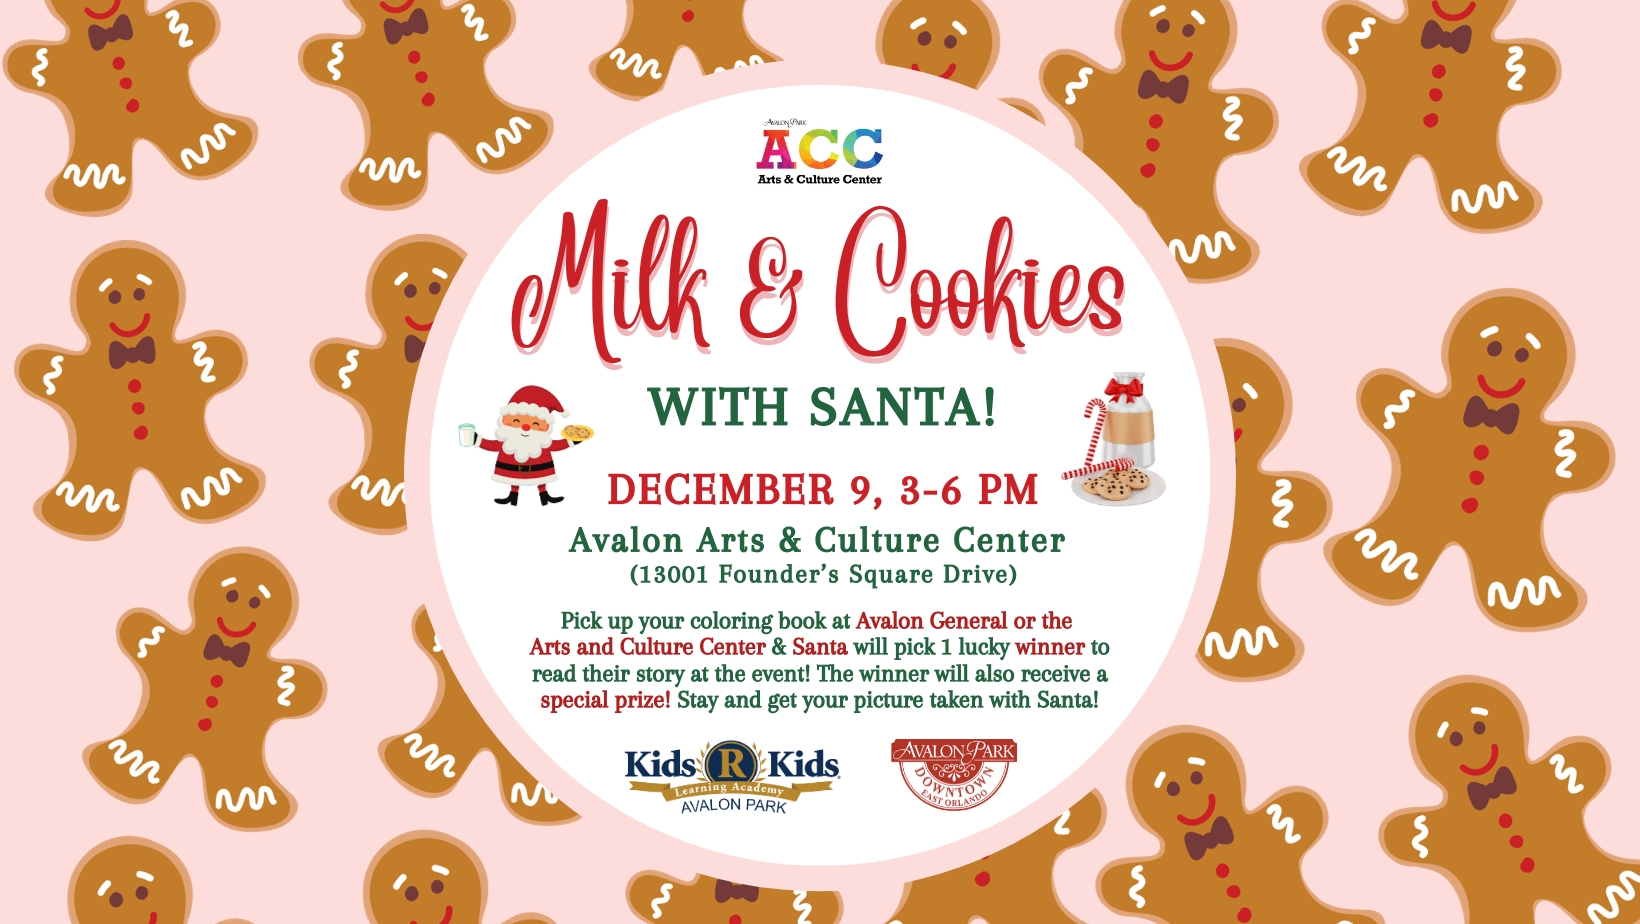 Milk & Cookies with Santa cover image